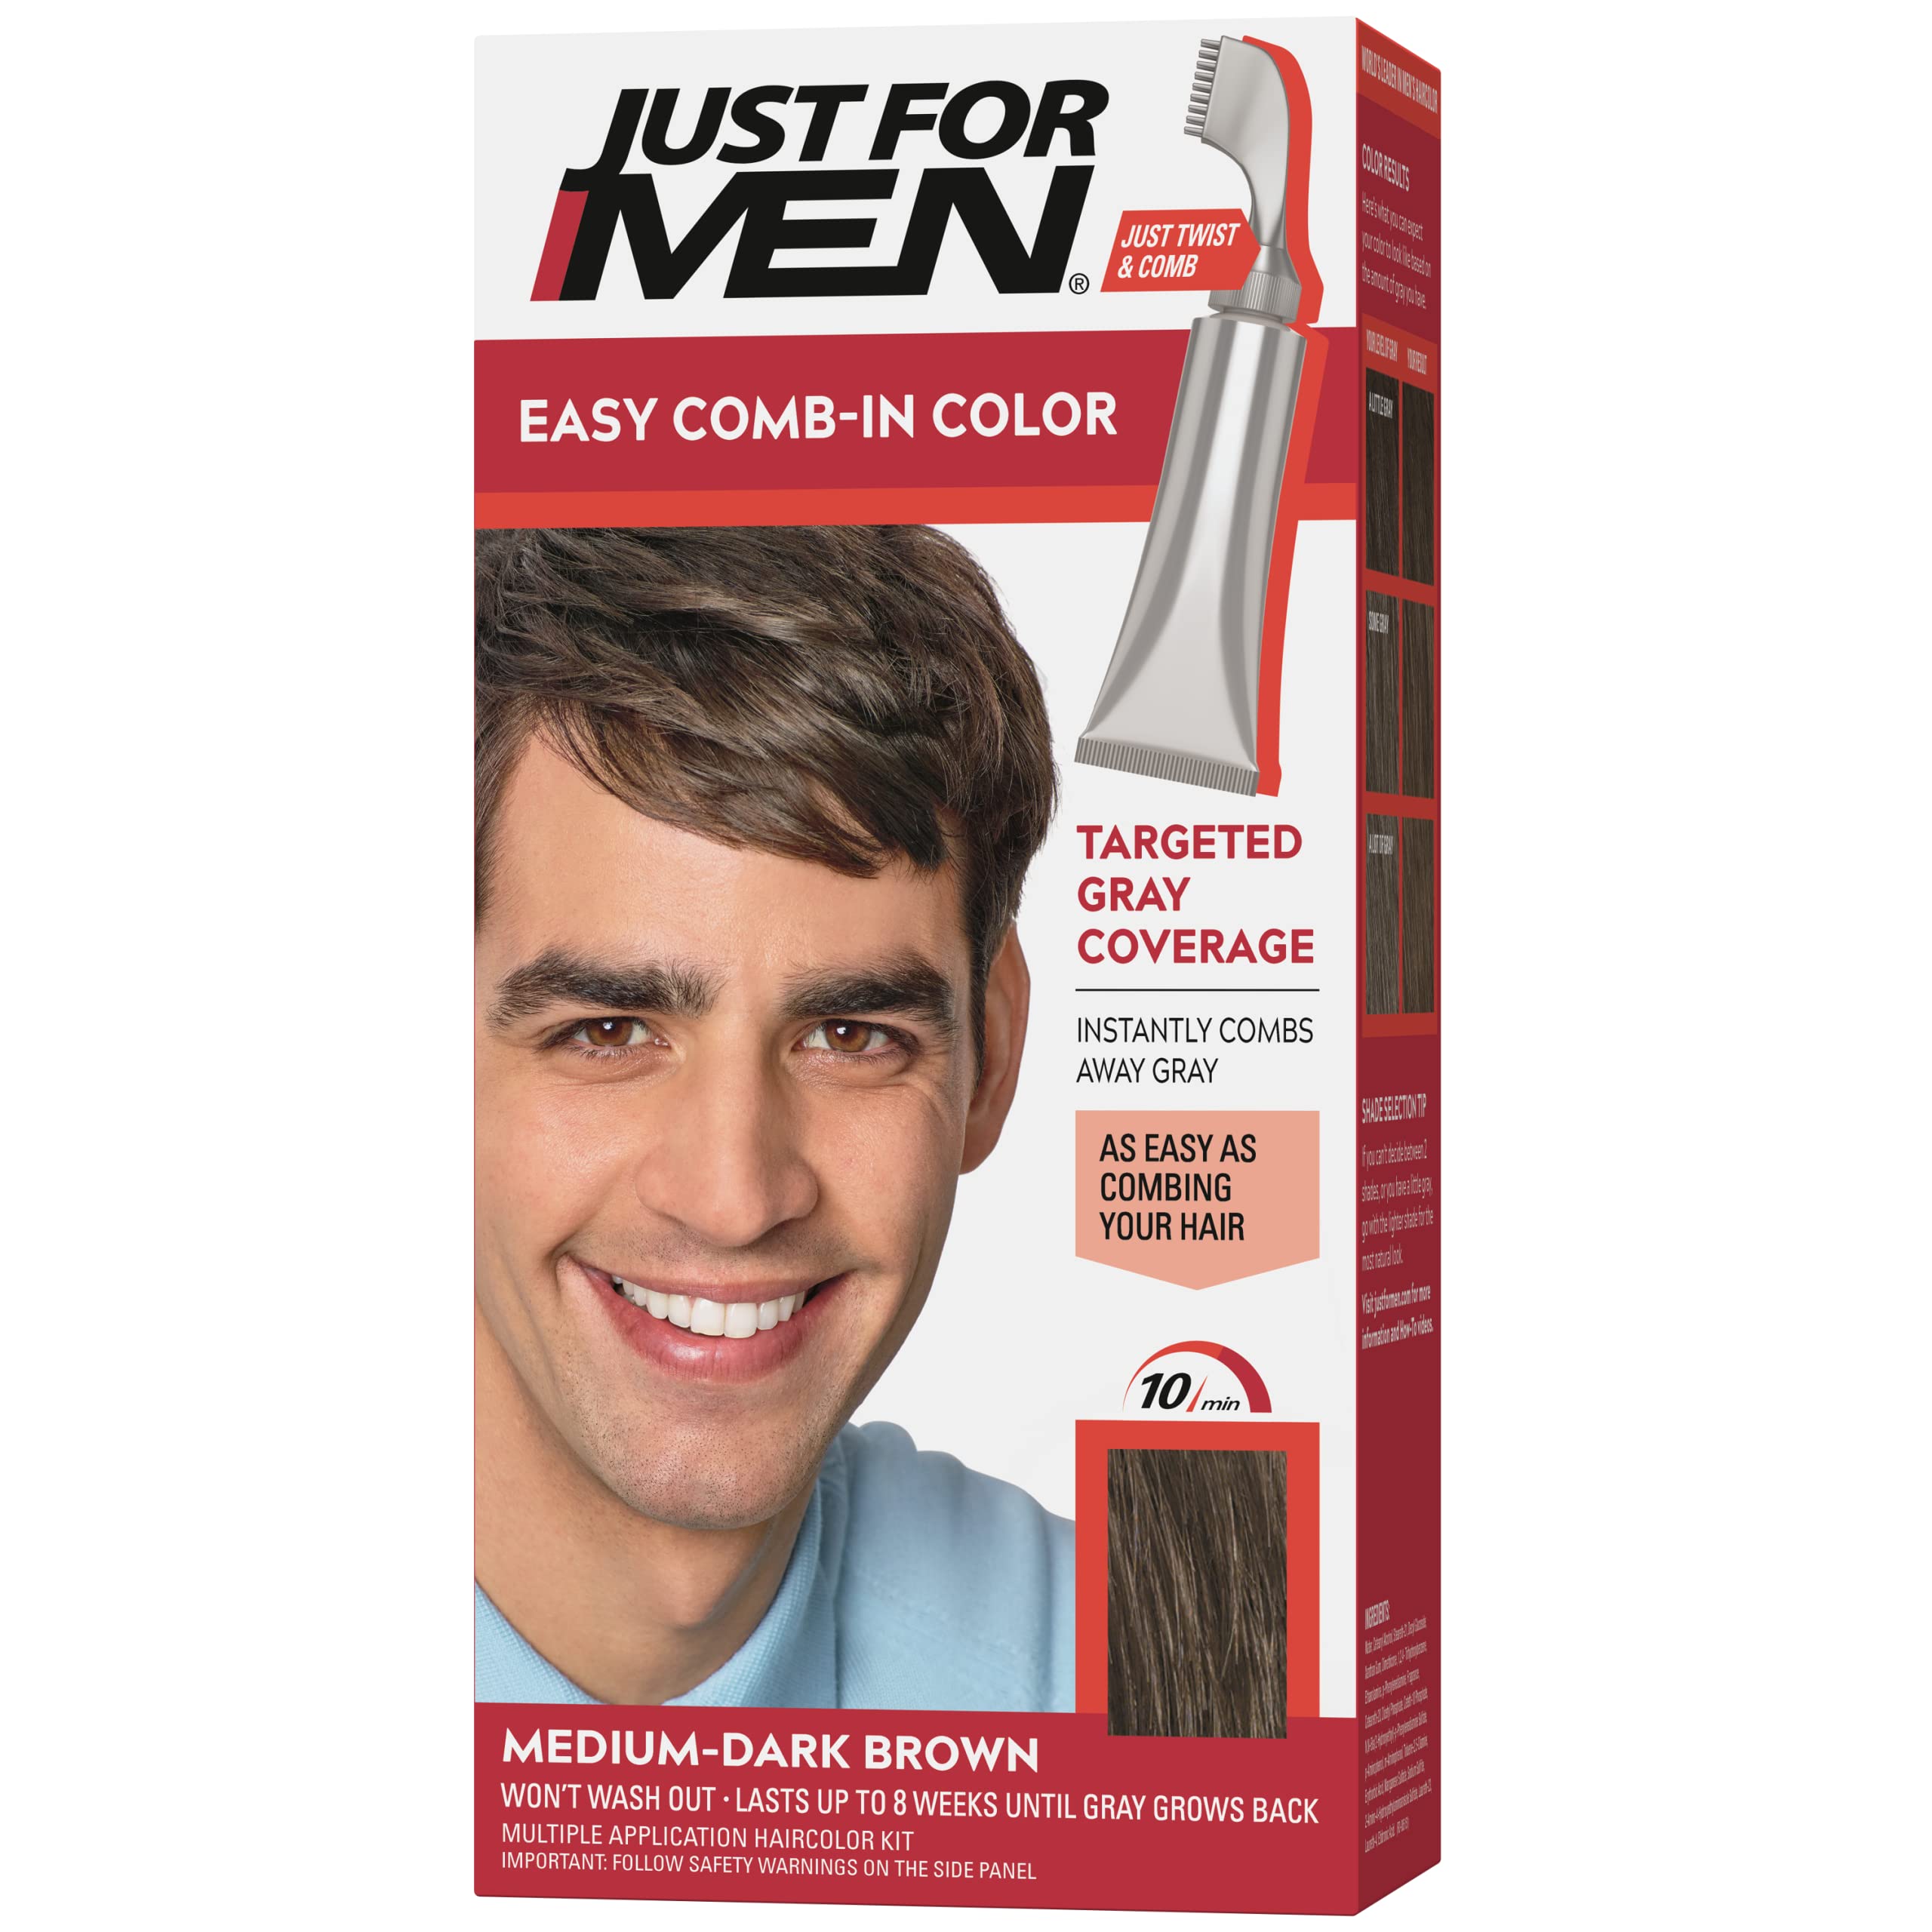 Just For Men Easy Comb-In Color Mens Hair Dye, Easy No Mix Application with Comb Applicator - Medium-Dark Brown, A-40, Pack of 1